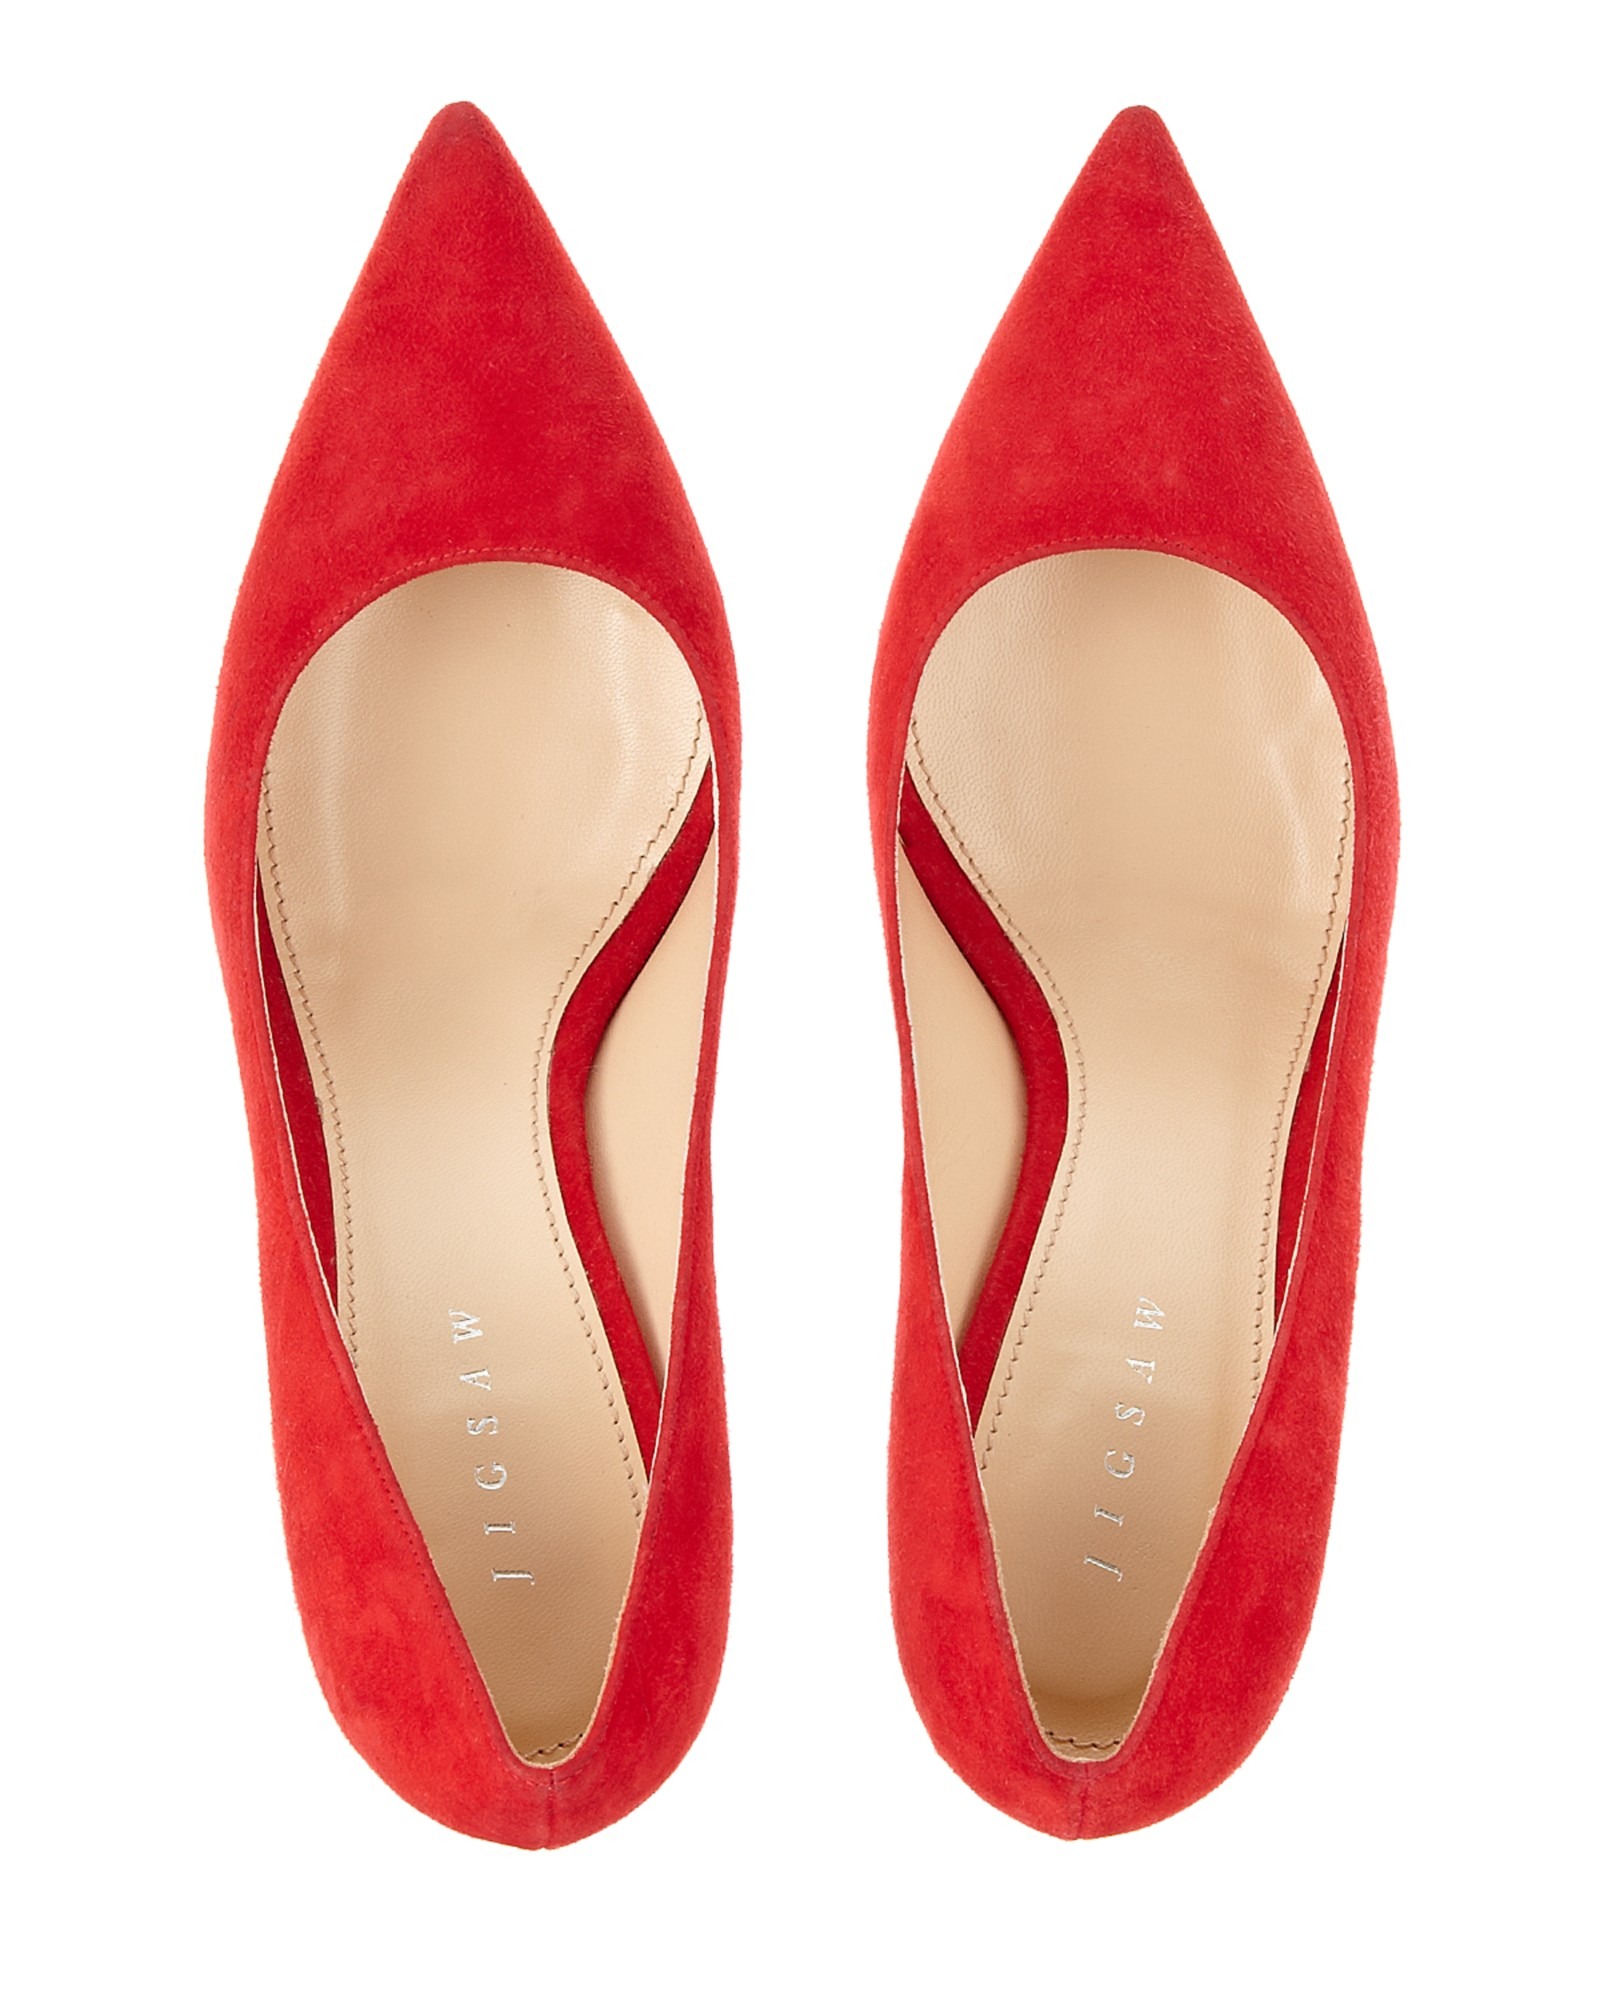 red suede court shoes